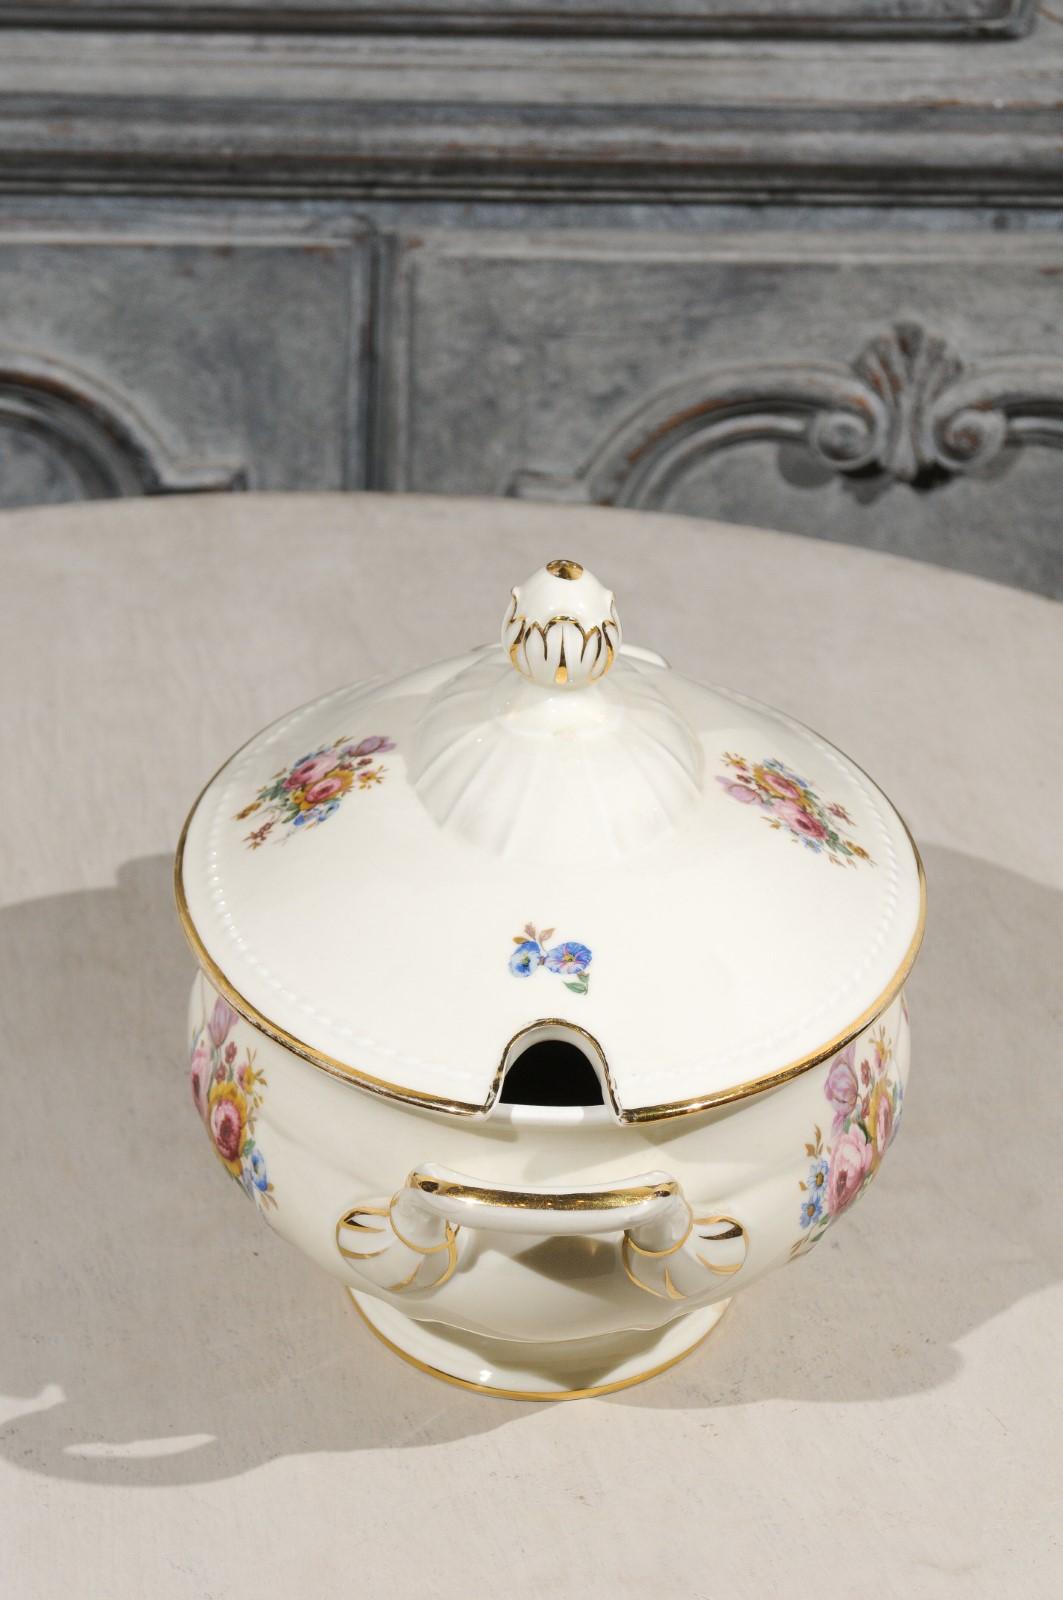 Painted Danish Porcelain Soup Tureen with Lid, Gilt Rim and Colorful Floral Decor, 1930s